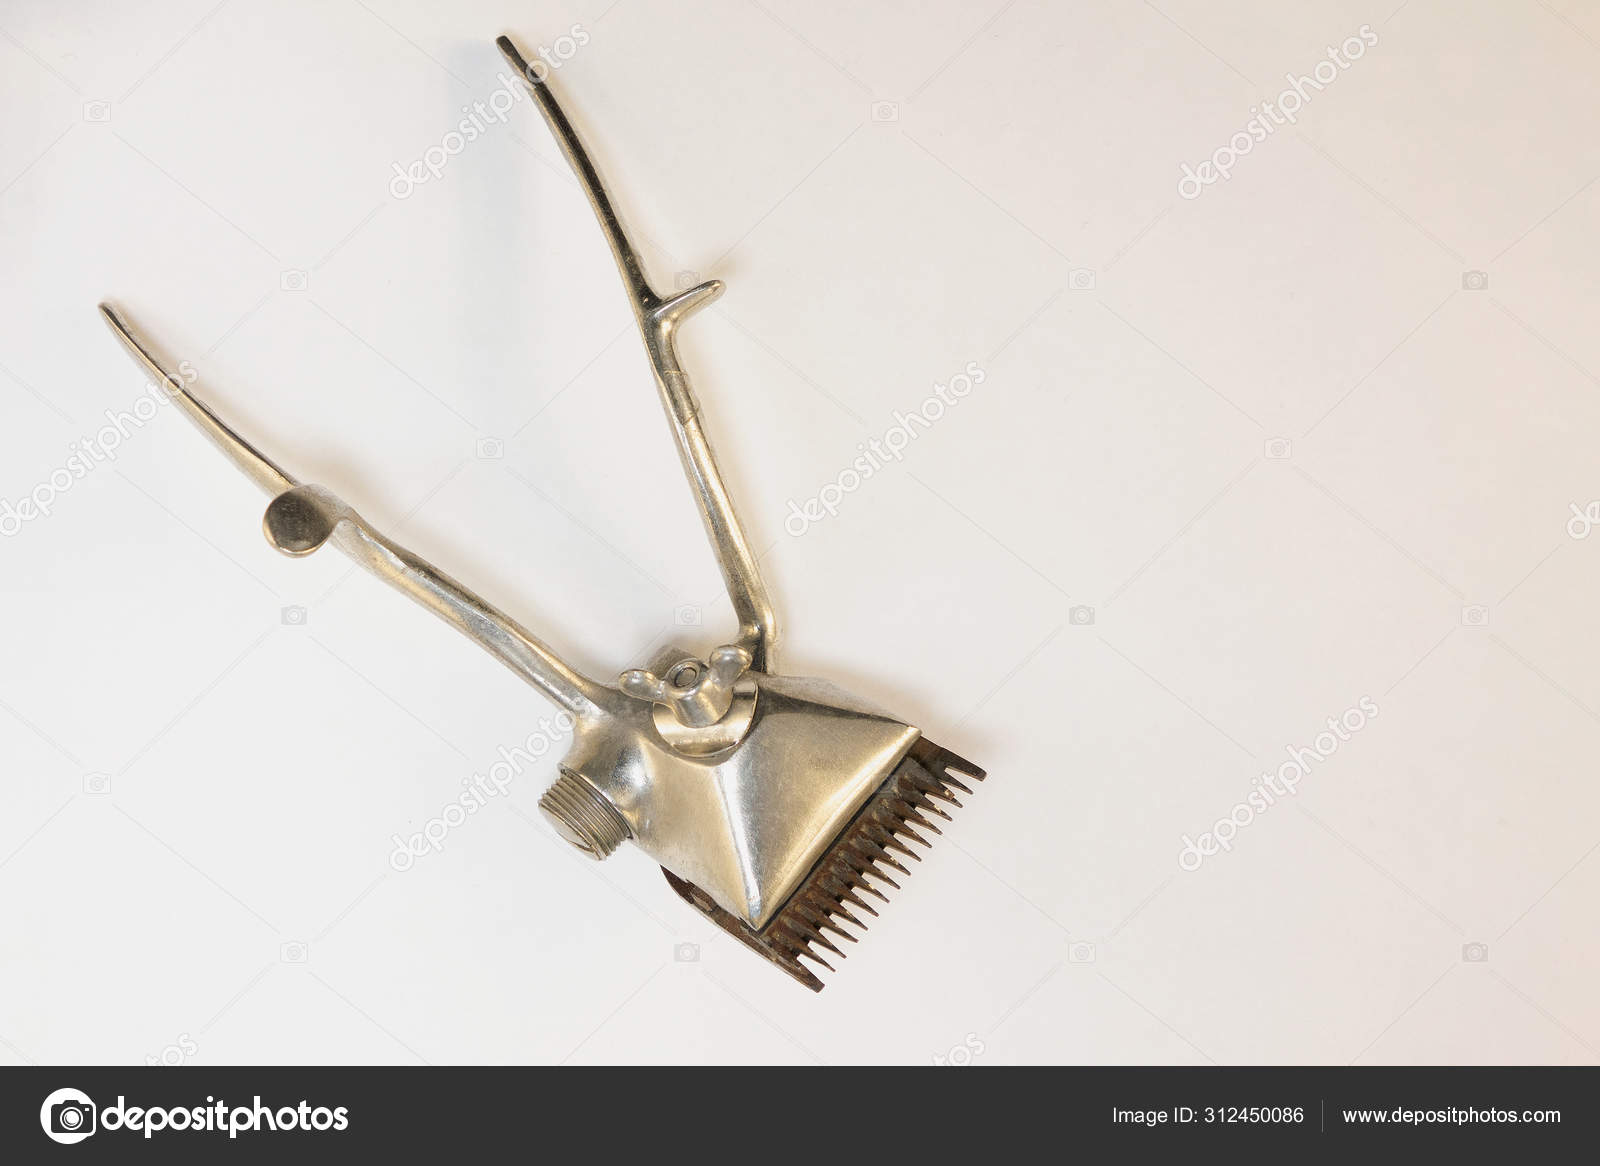 vintage manual hair clippers